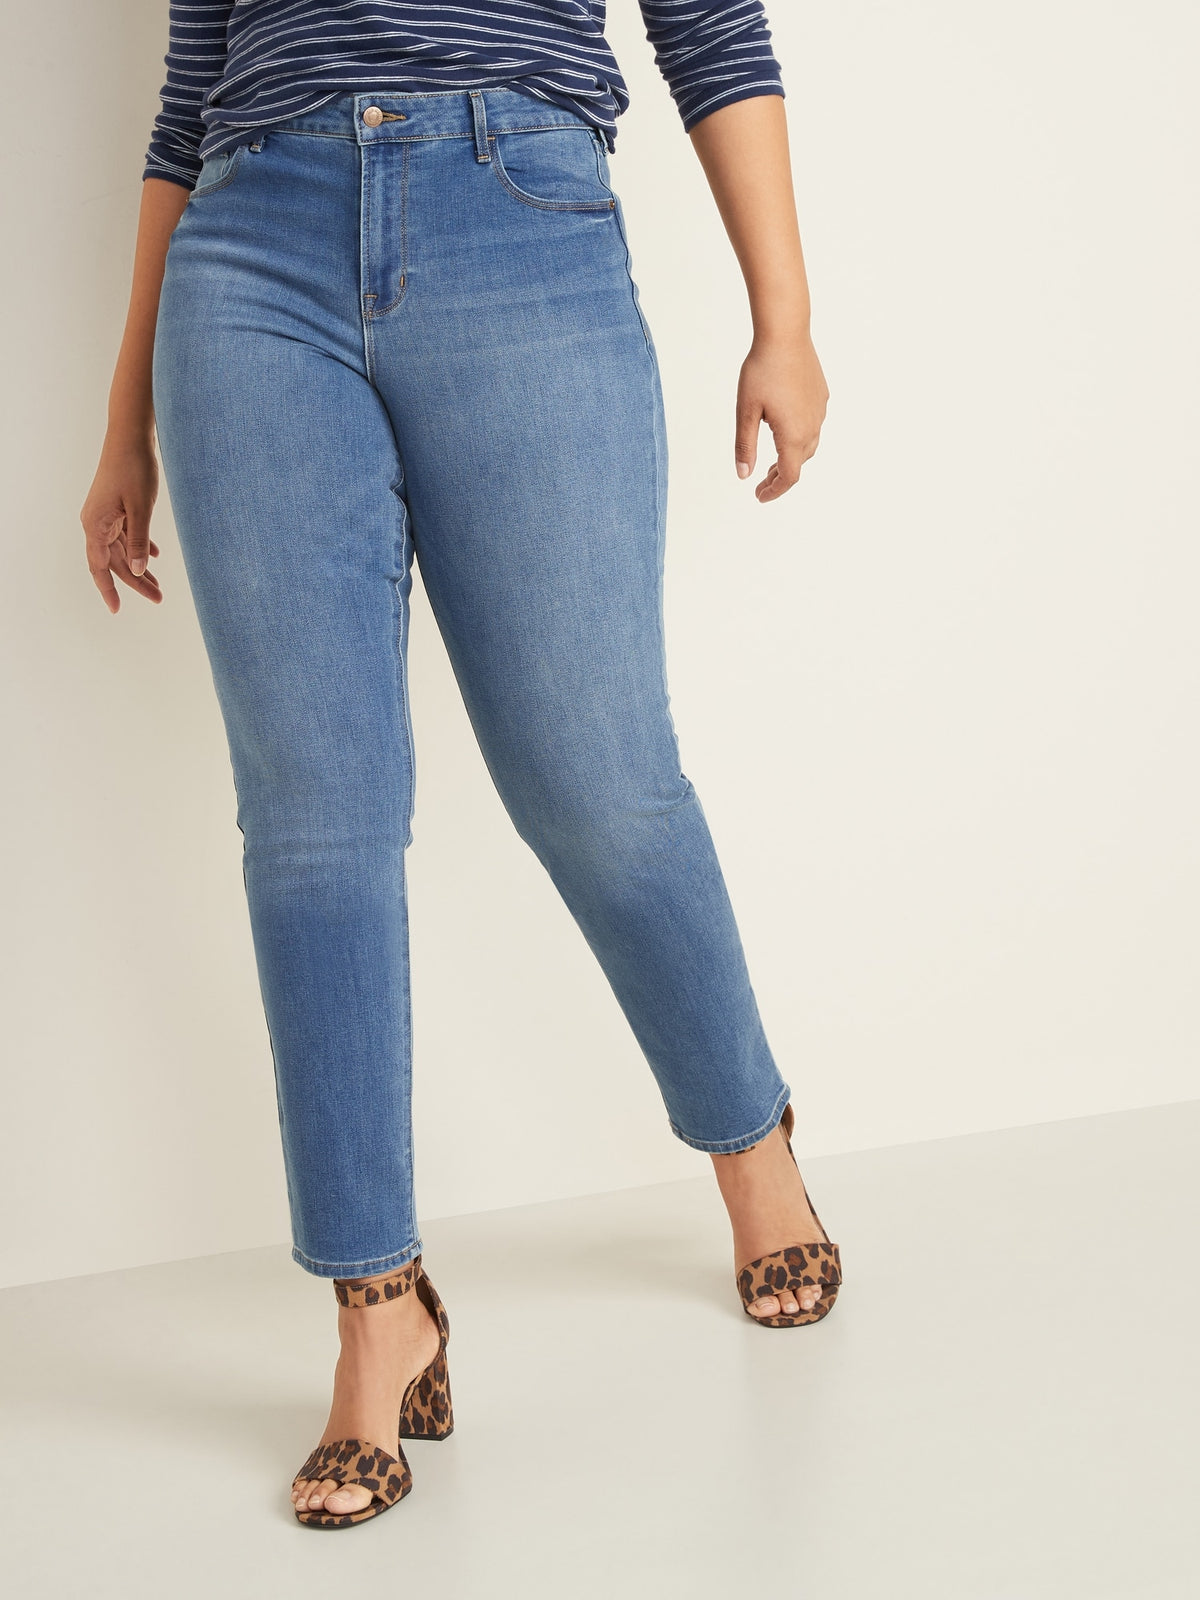 power jeans old navy Cheap Sale - OFF 62%